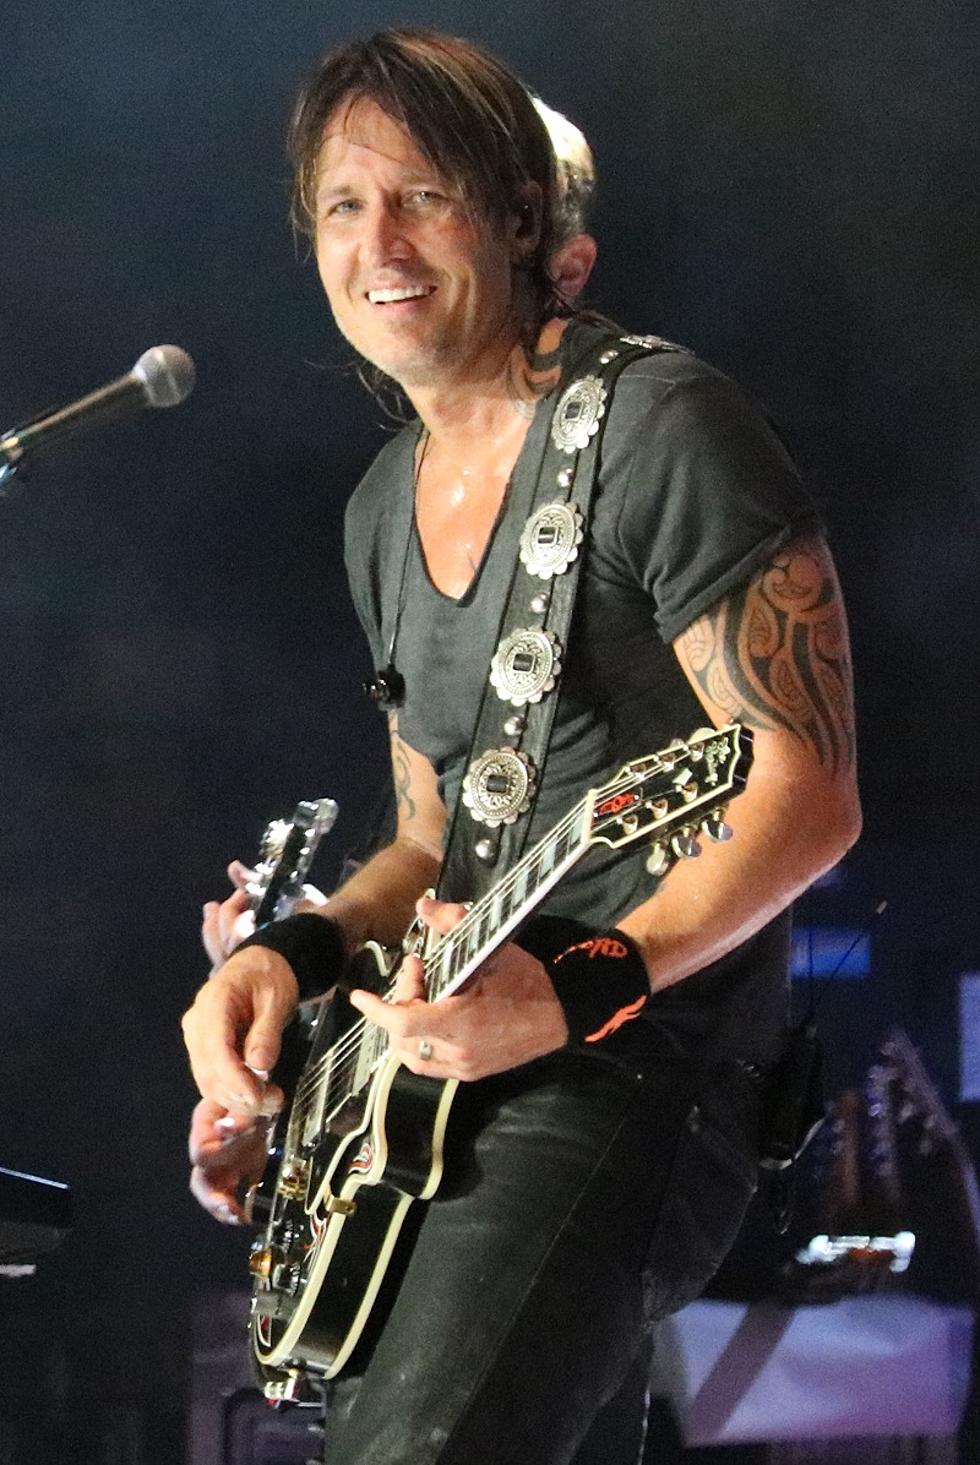 Keith Urban and Big & Rich Posted Videos About the GJCF [VIDEOS]